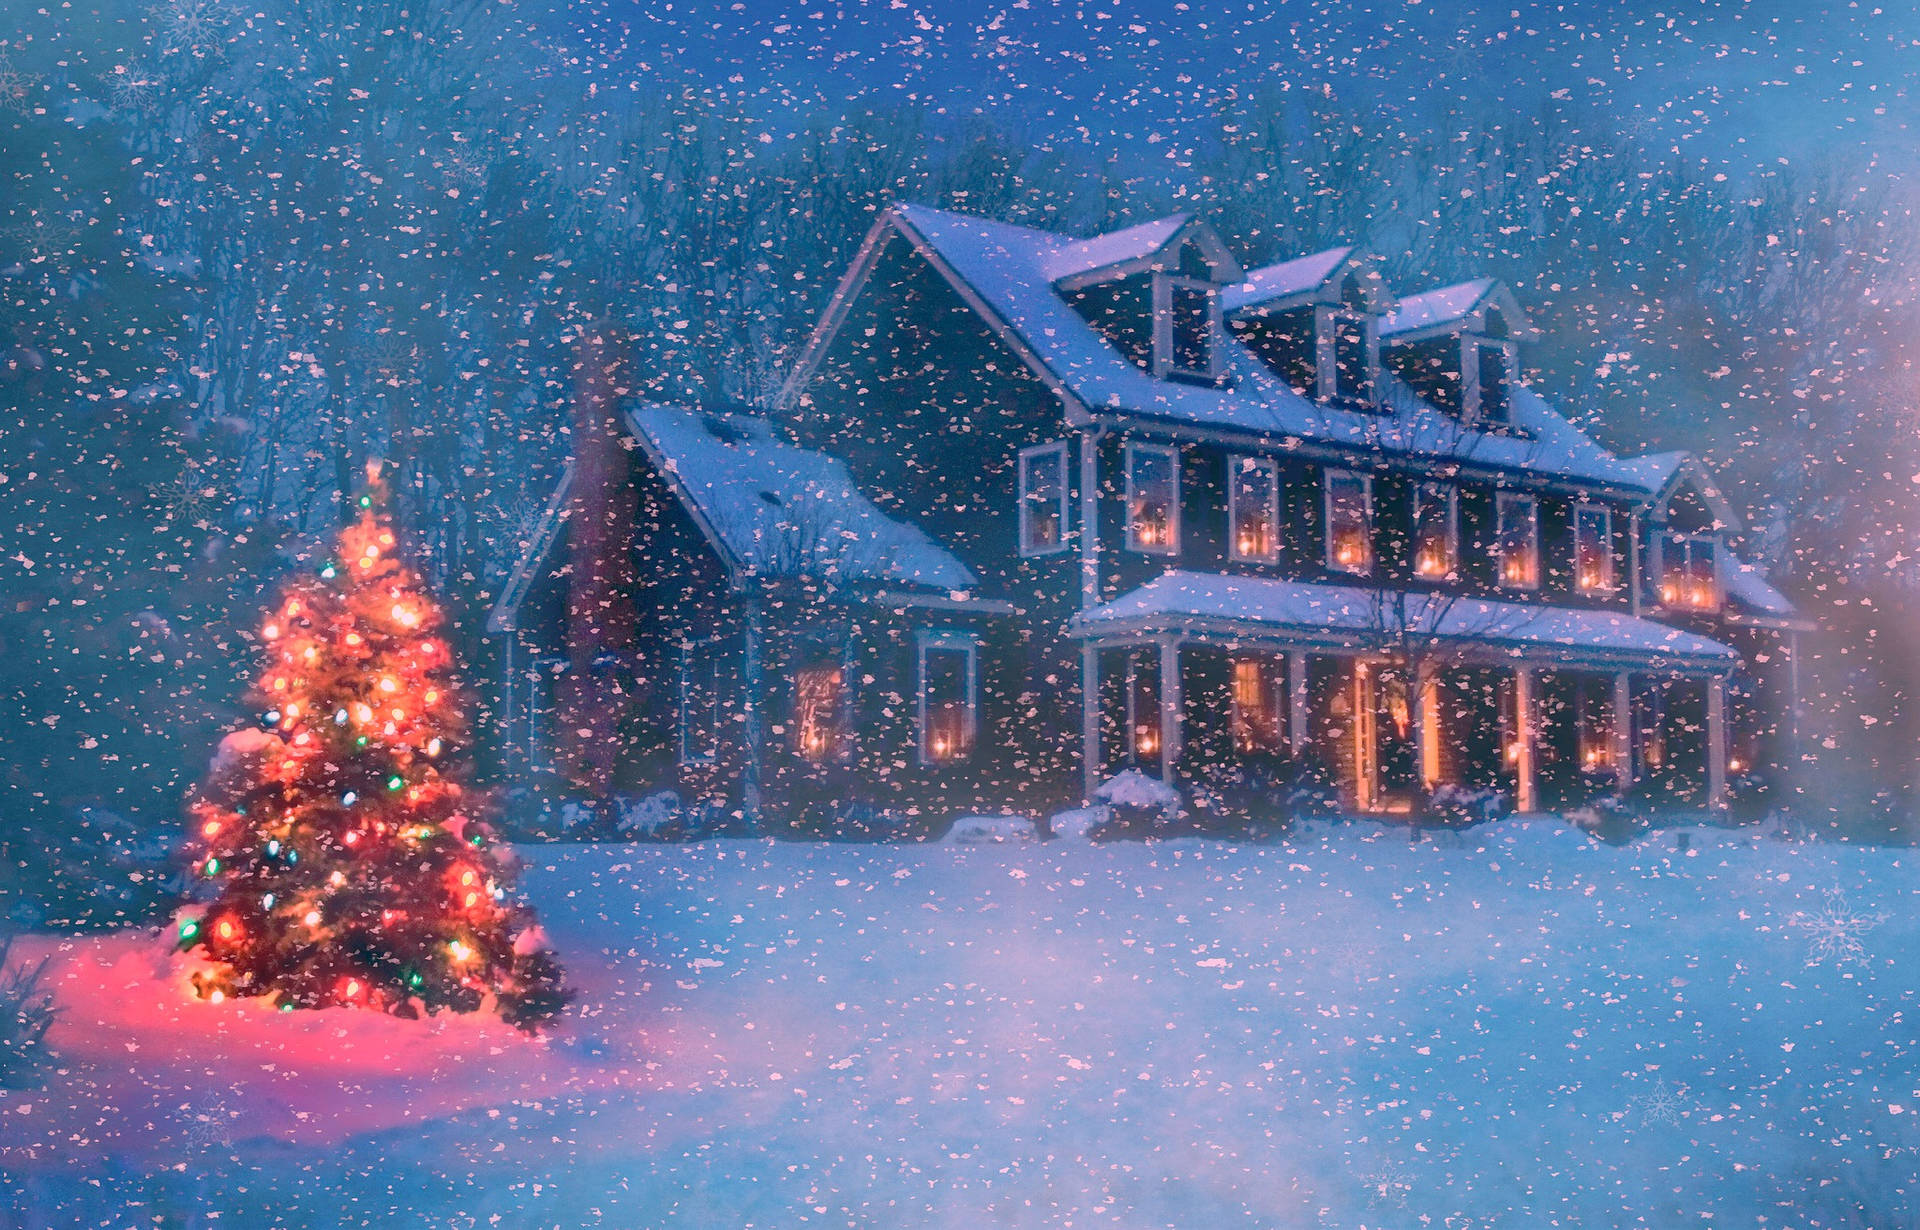 Enjoy the Spirit of Christmas with a Widescreen View Wallpaper